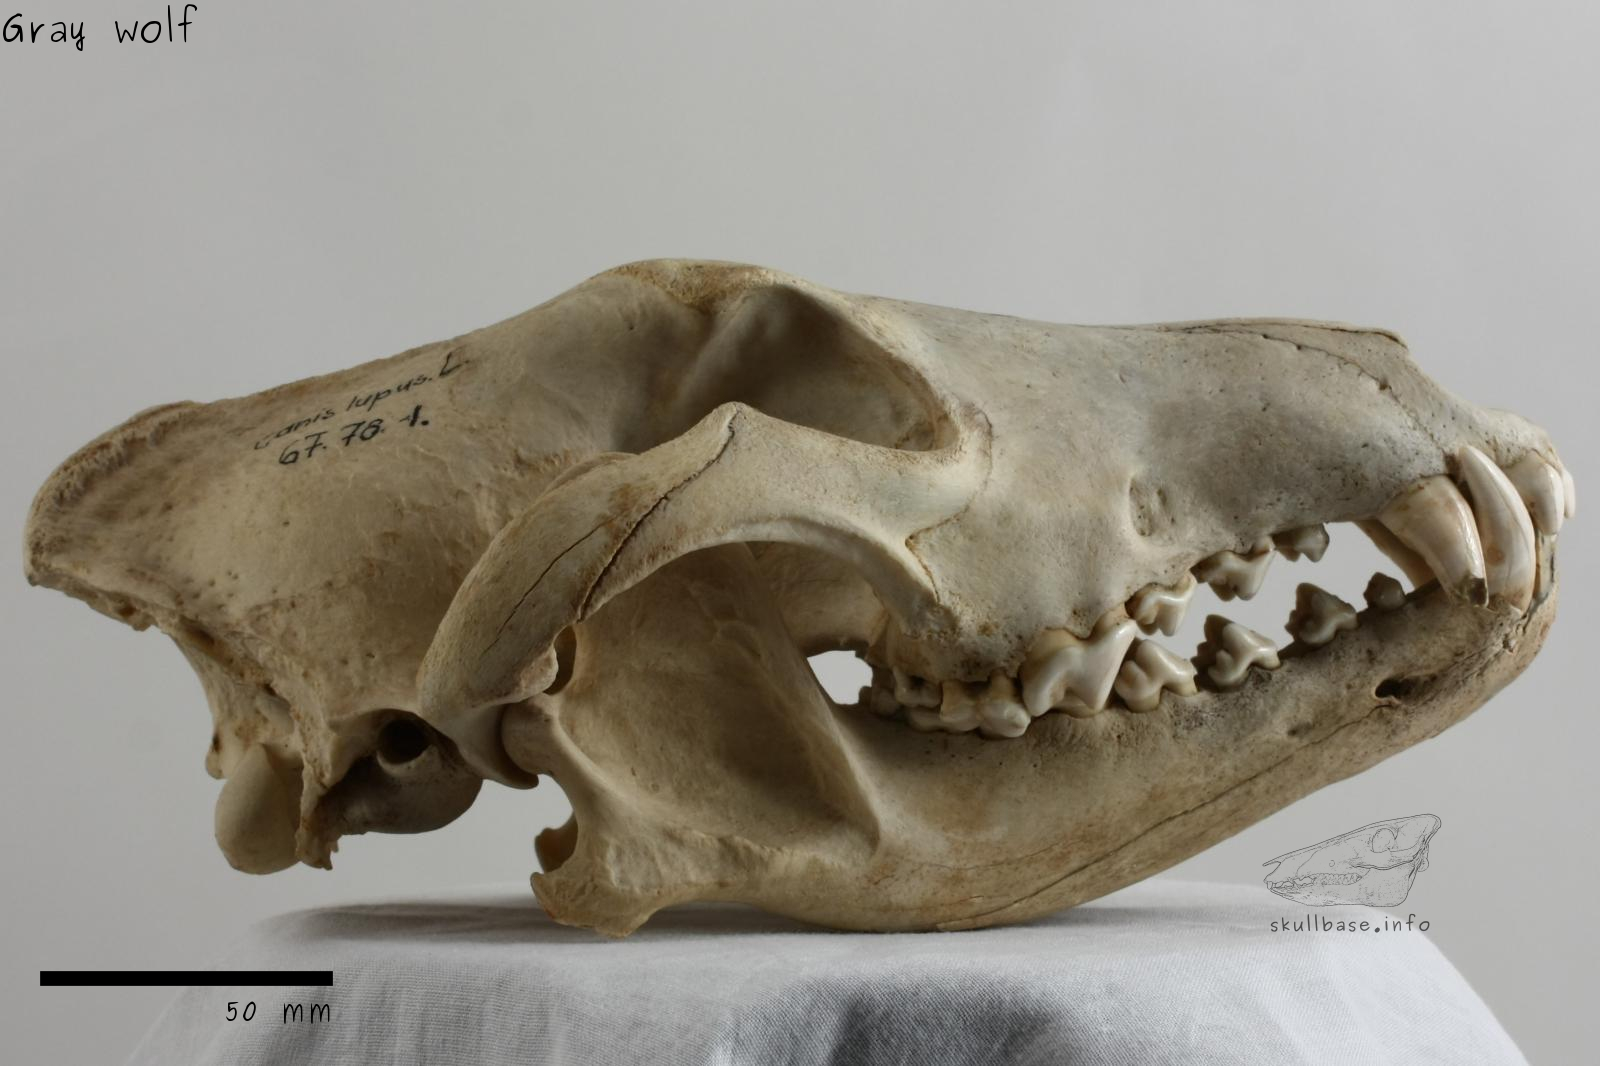 Gray wolf (Canis lupus) skull lateral view